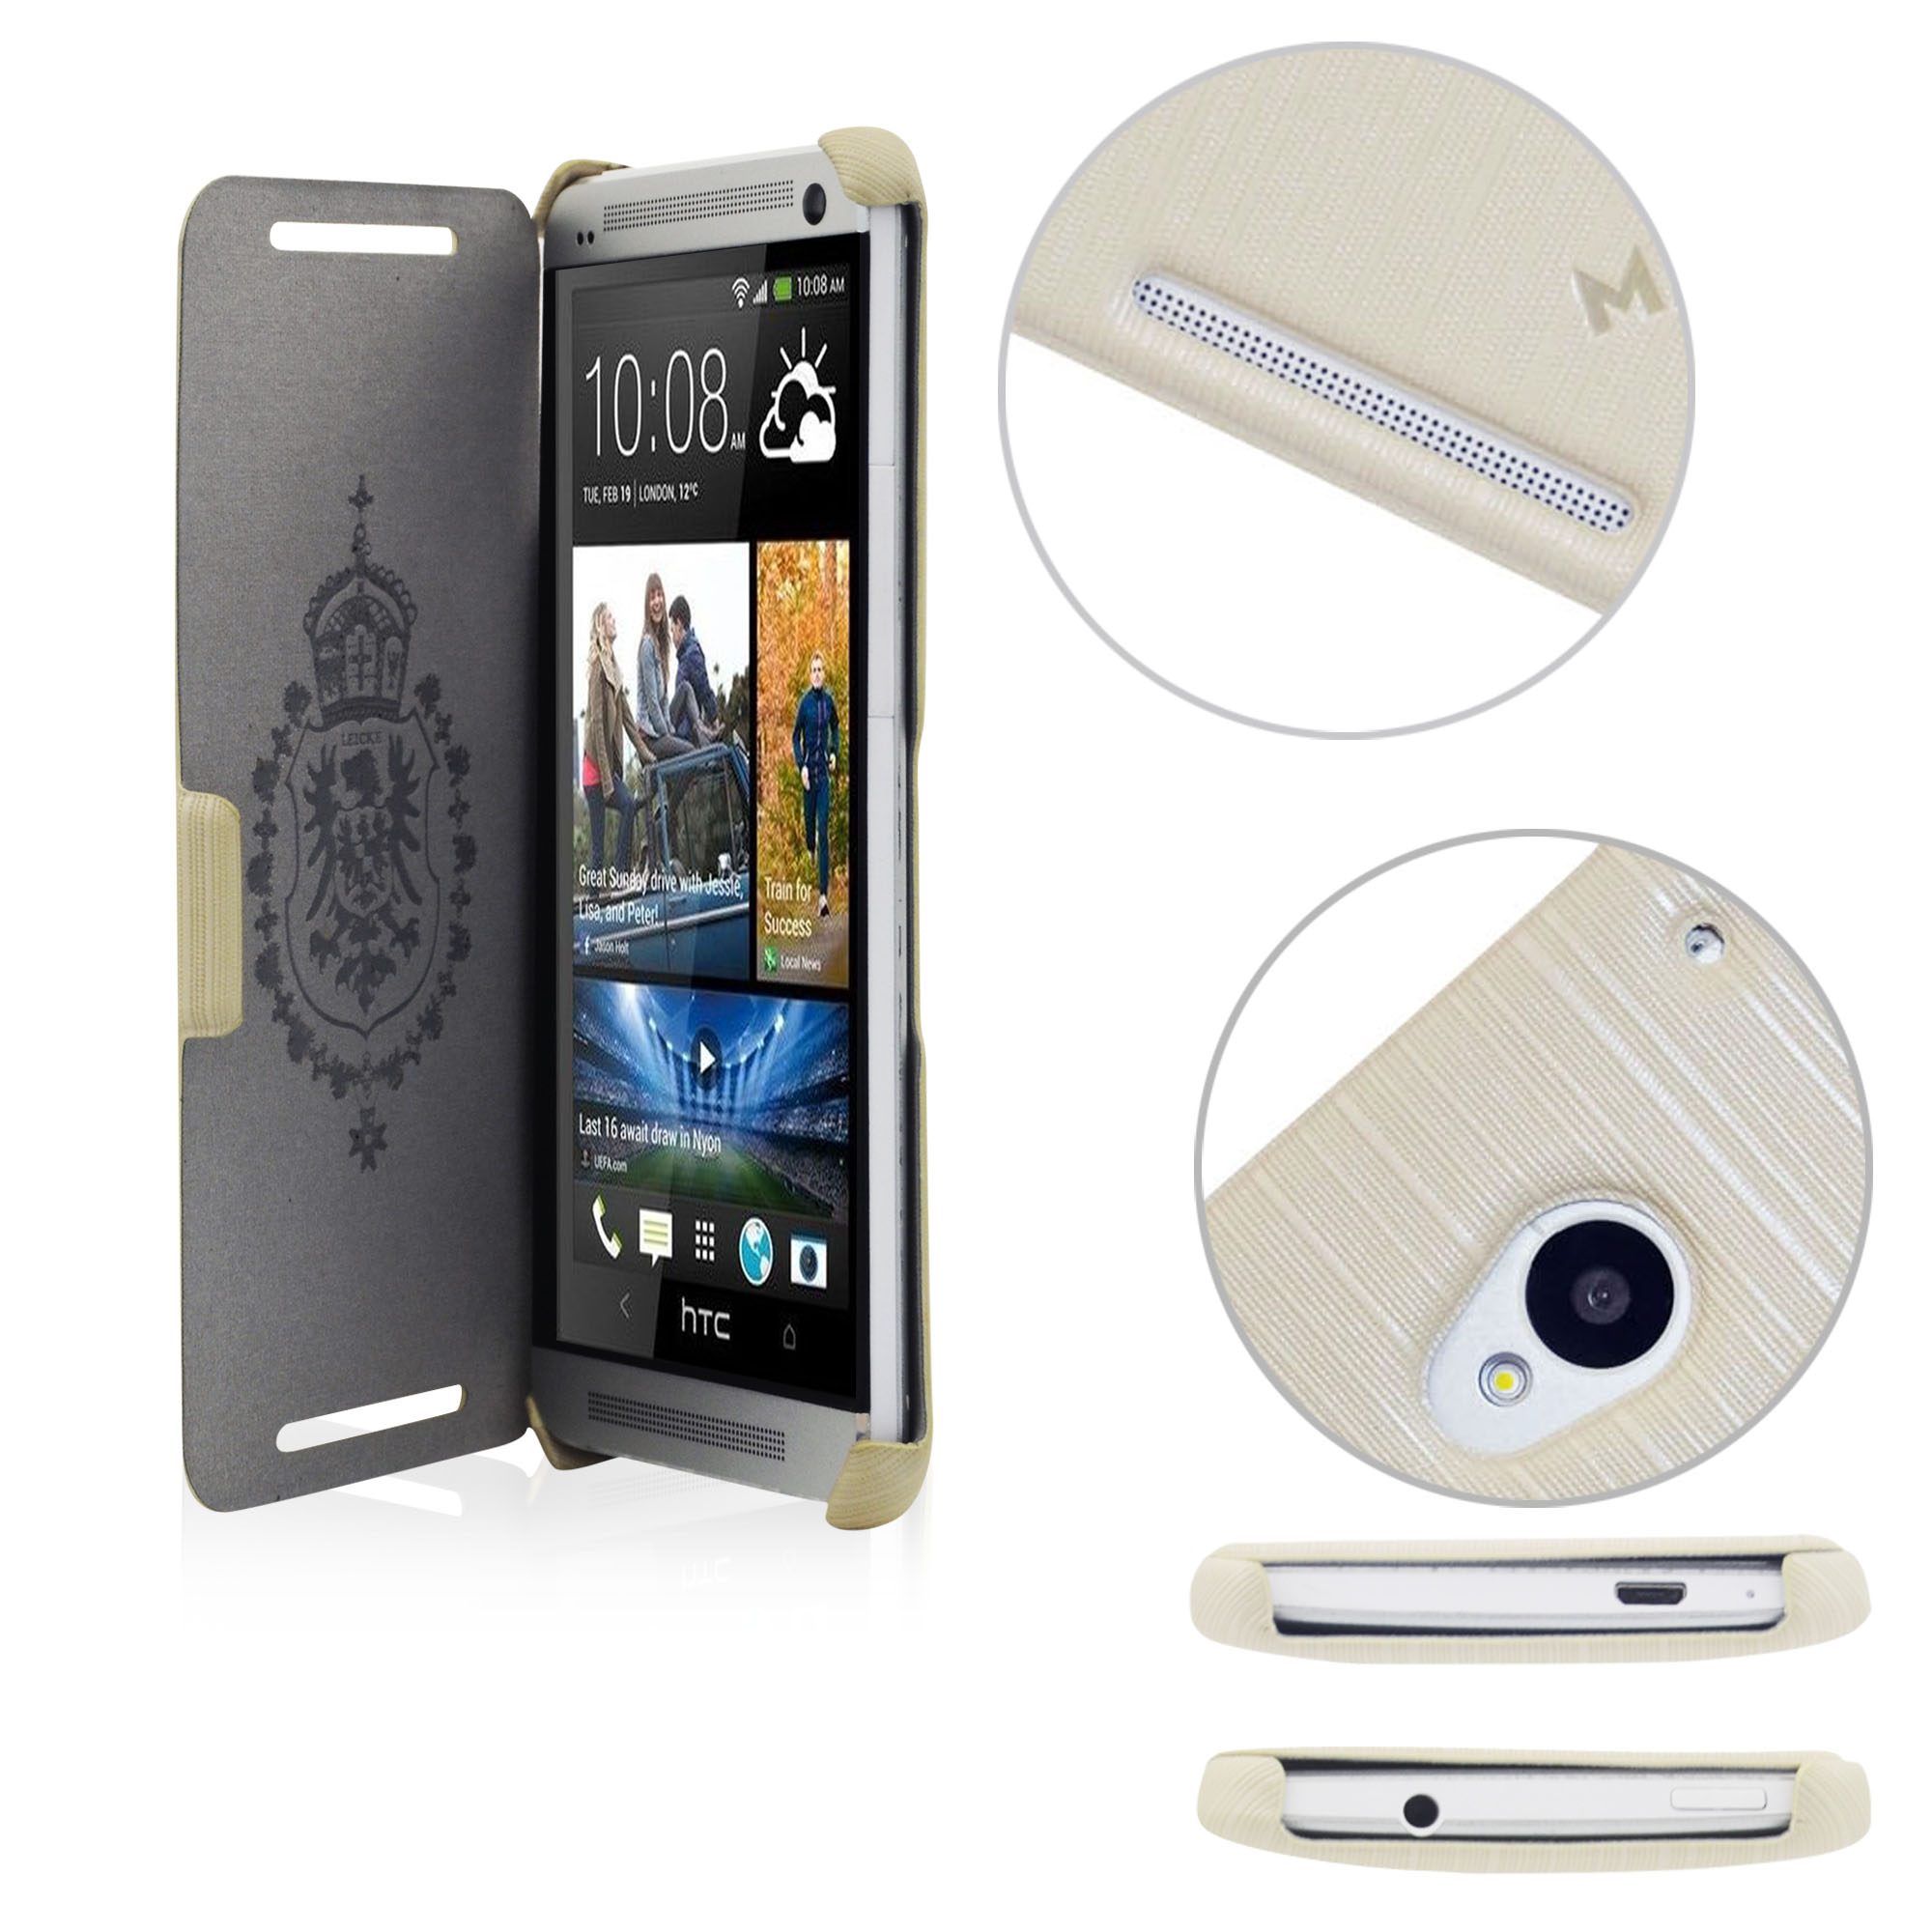 Leicke Manna Case Flip Cover And Wallet Stand For Htc One M7